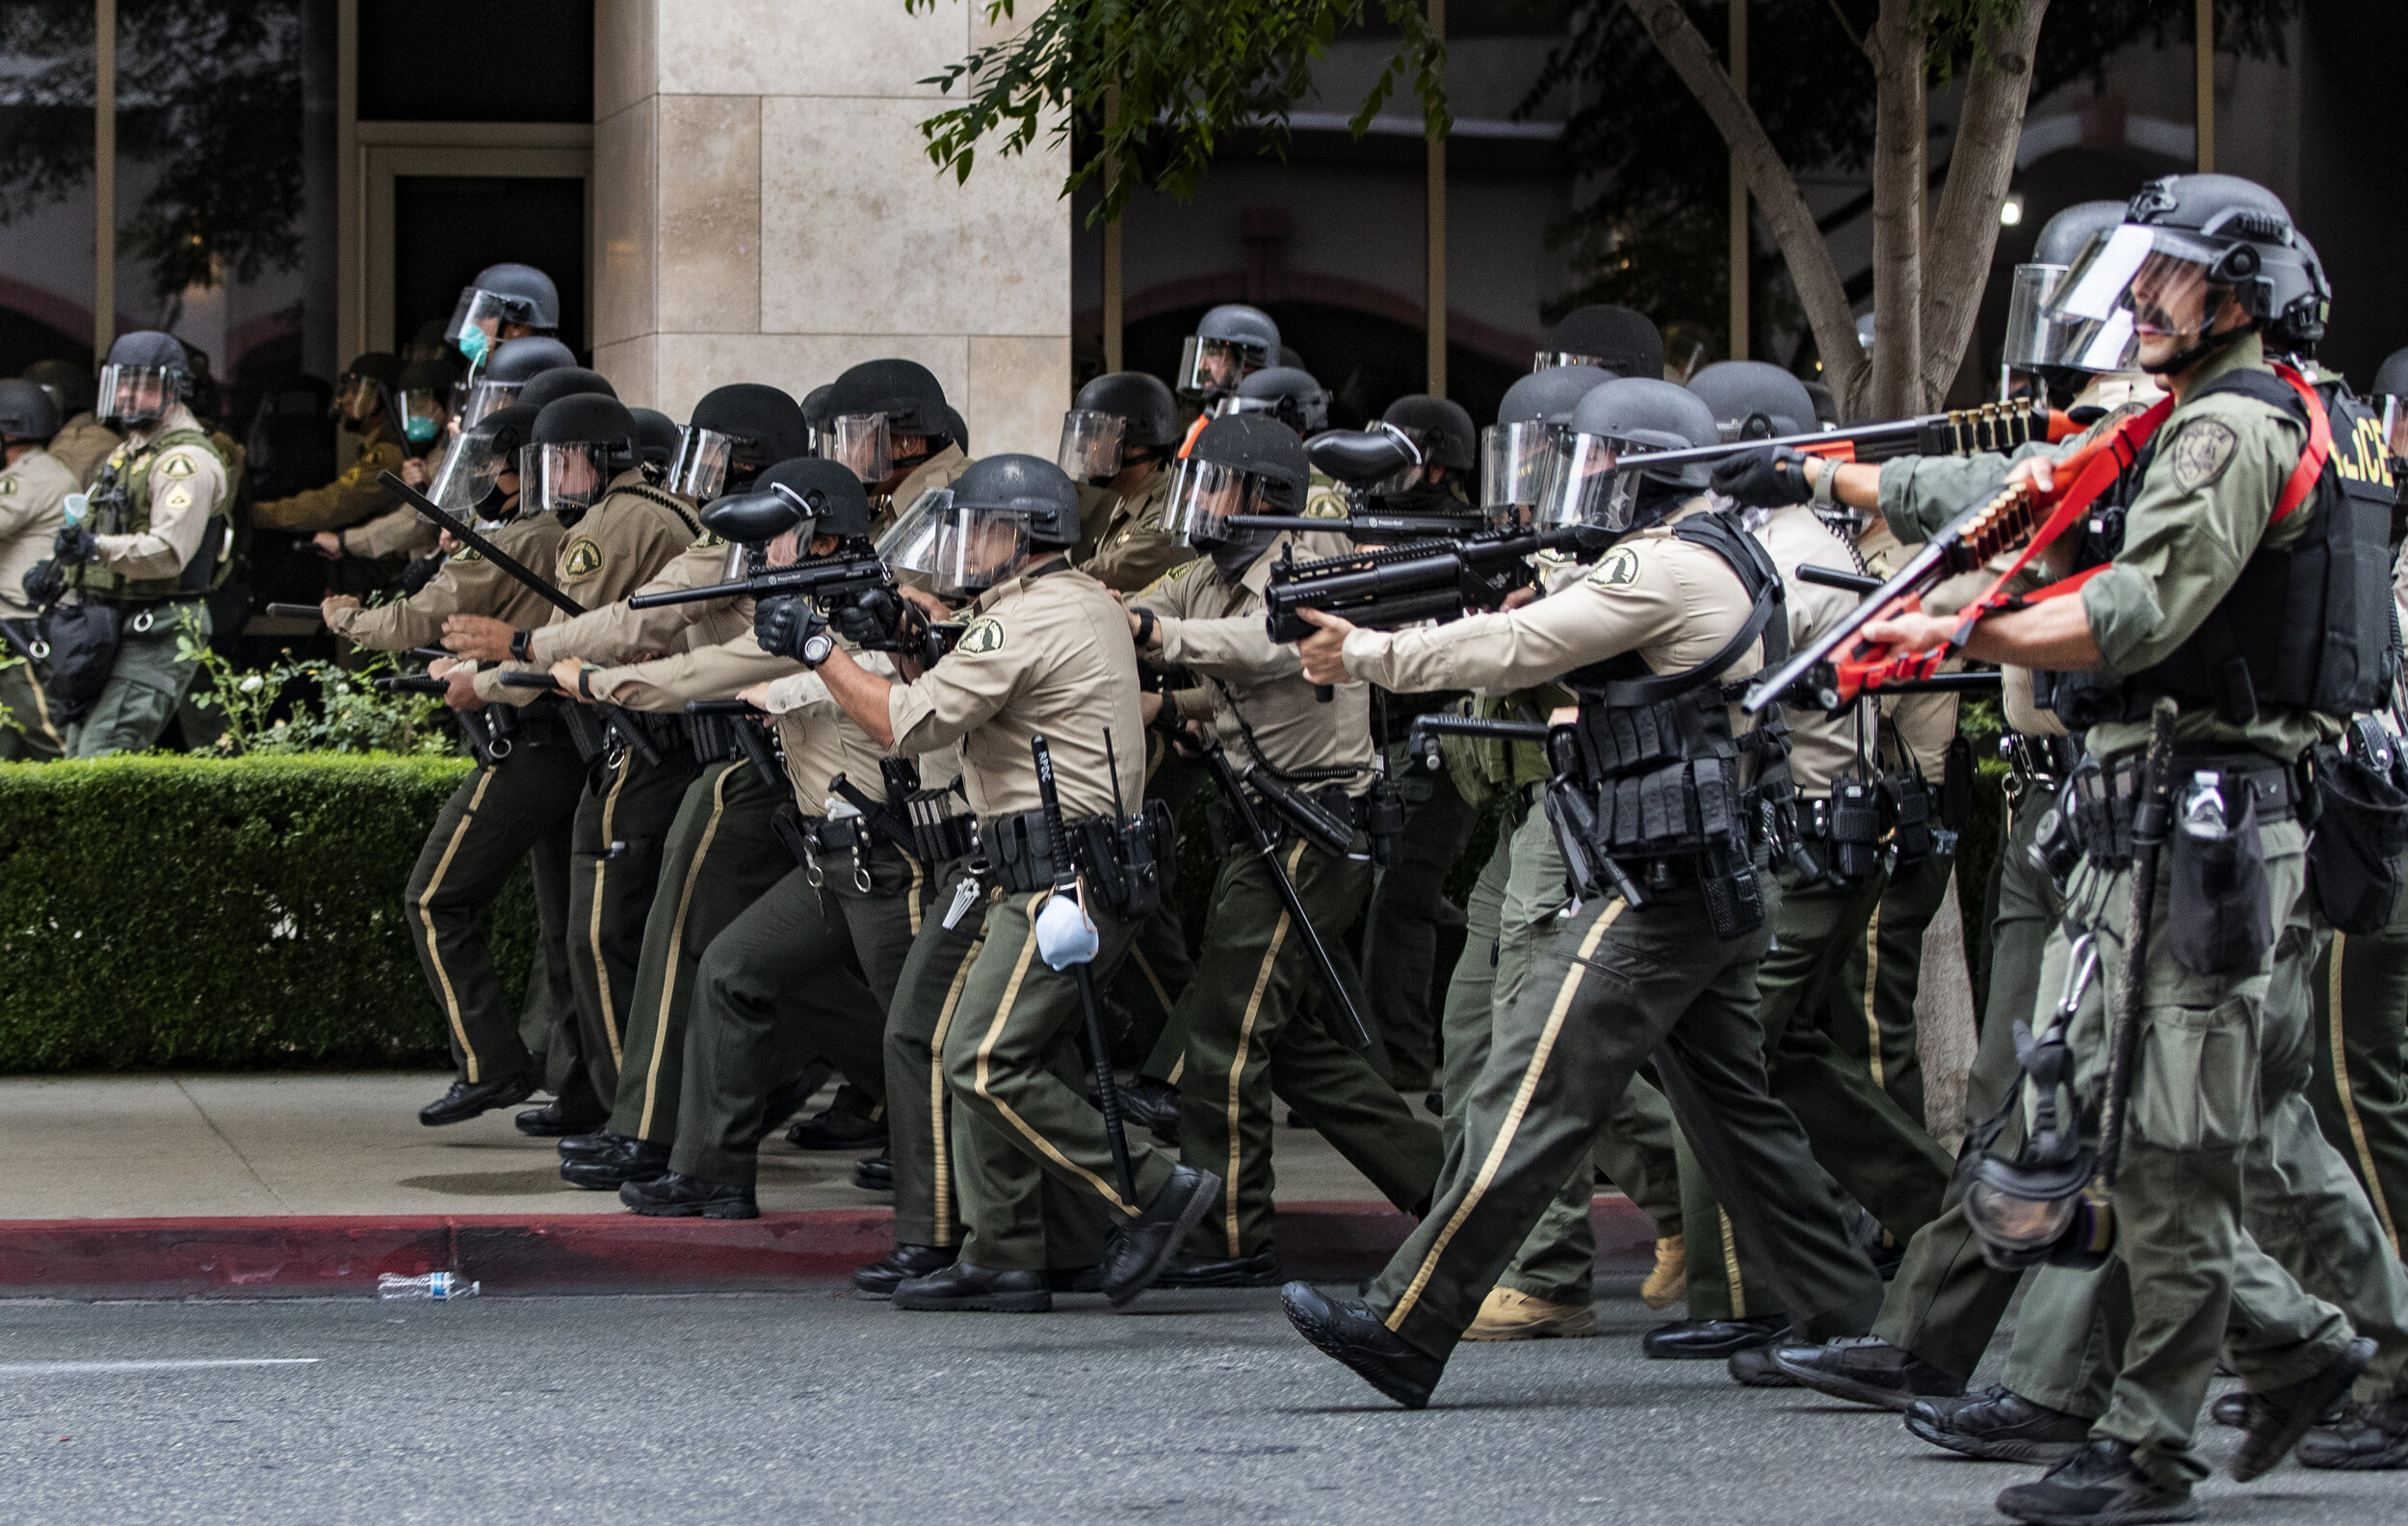  RIVERSIDE, CA - JUNE 1, 2020: Riverside County Sheriffs advance on demonstrators who refused to disperse after curfew during a protest against the death of George Floyd during the coronavirus pandemic on June 1, 2020 in Riverside, California. Thousa